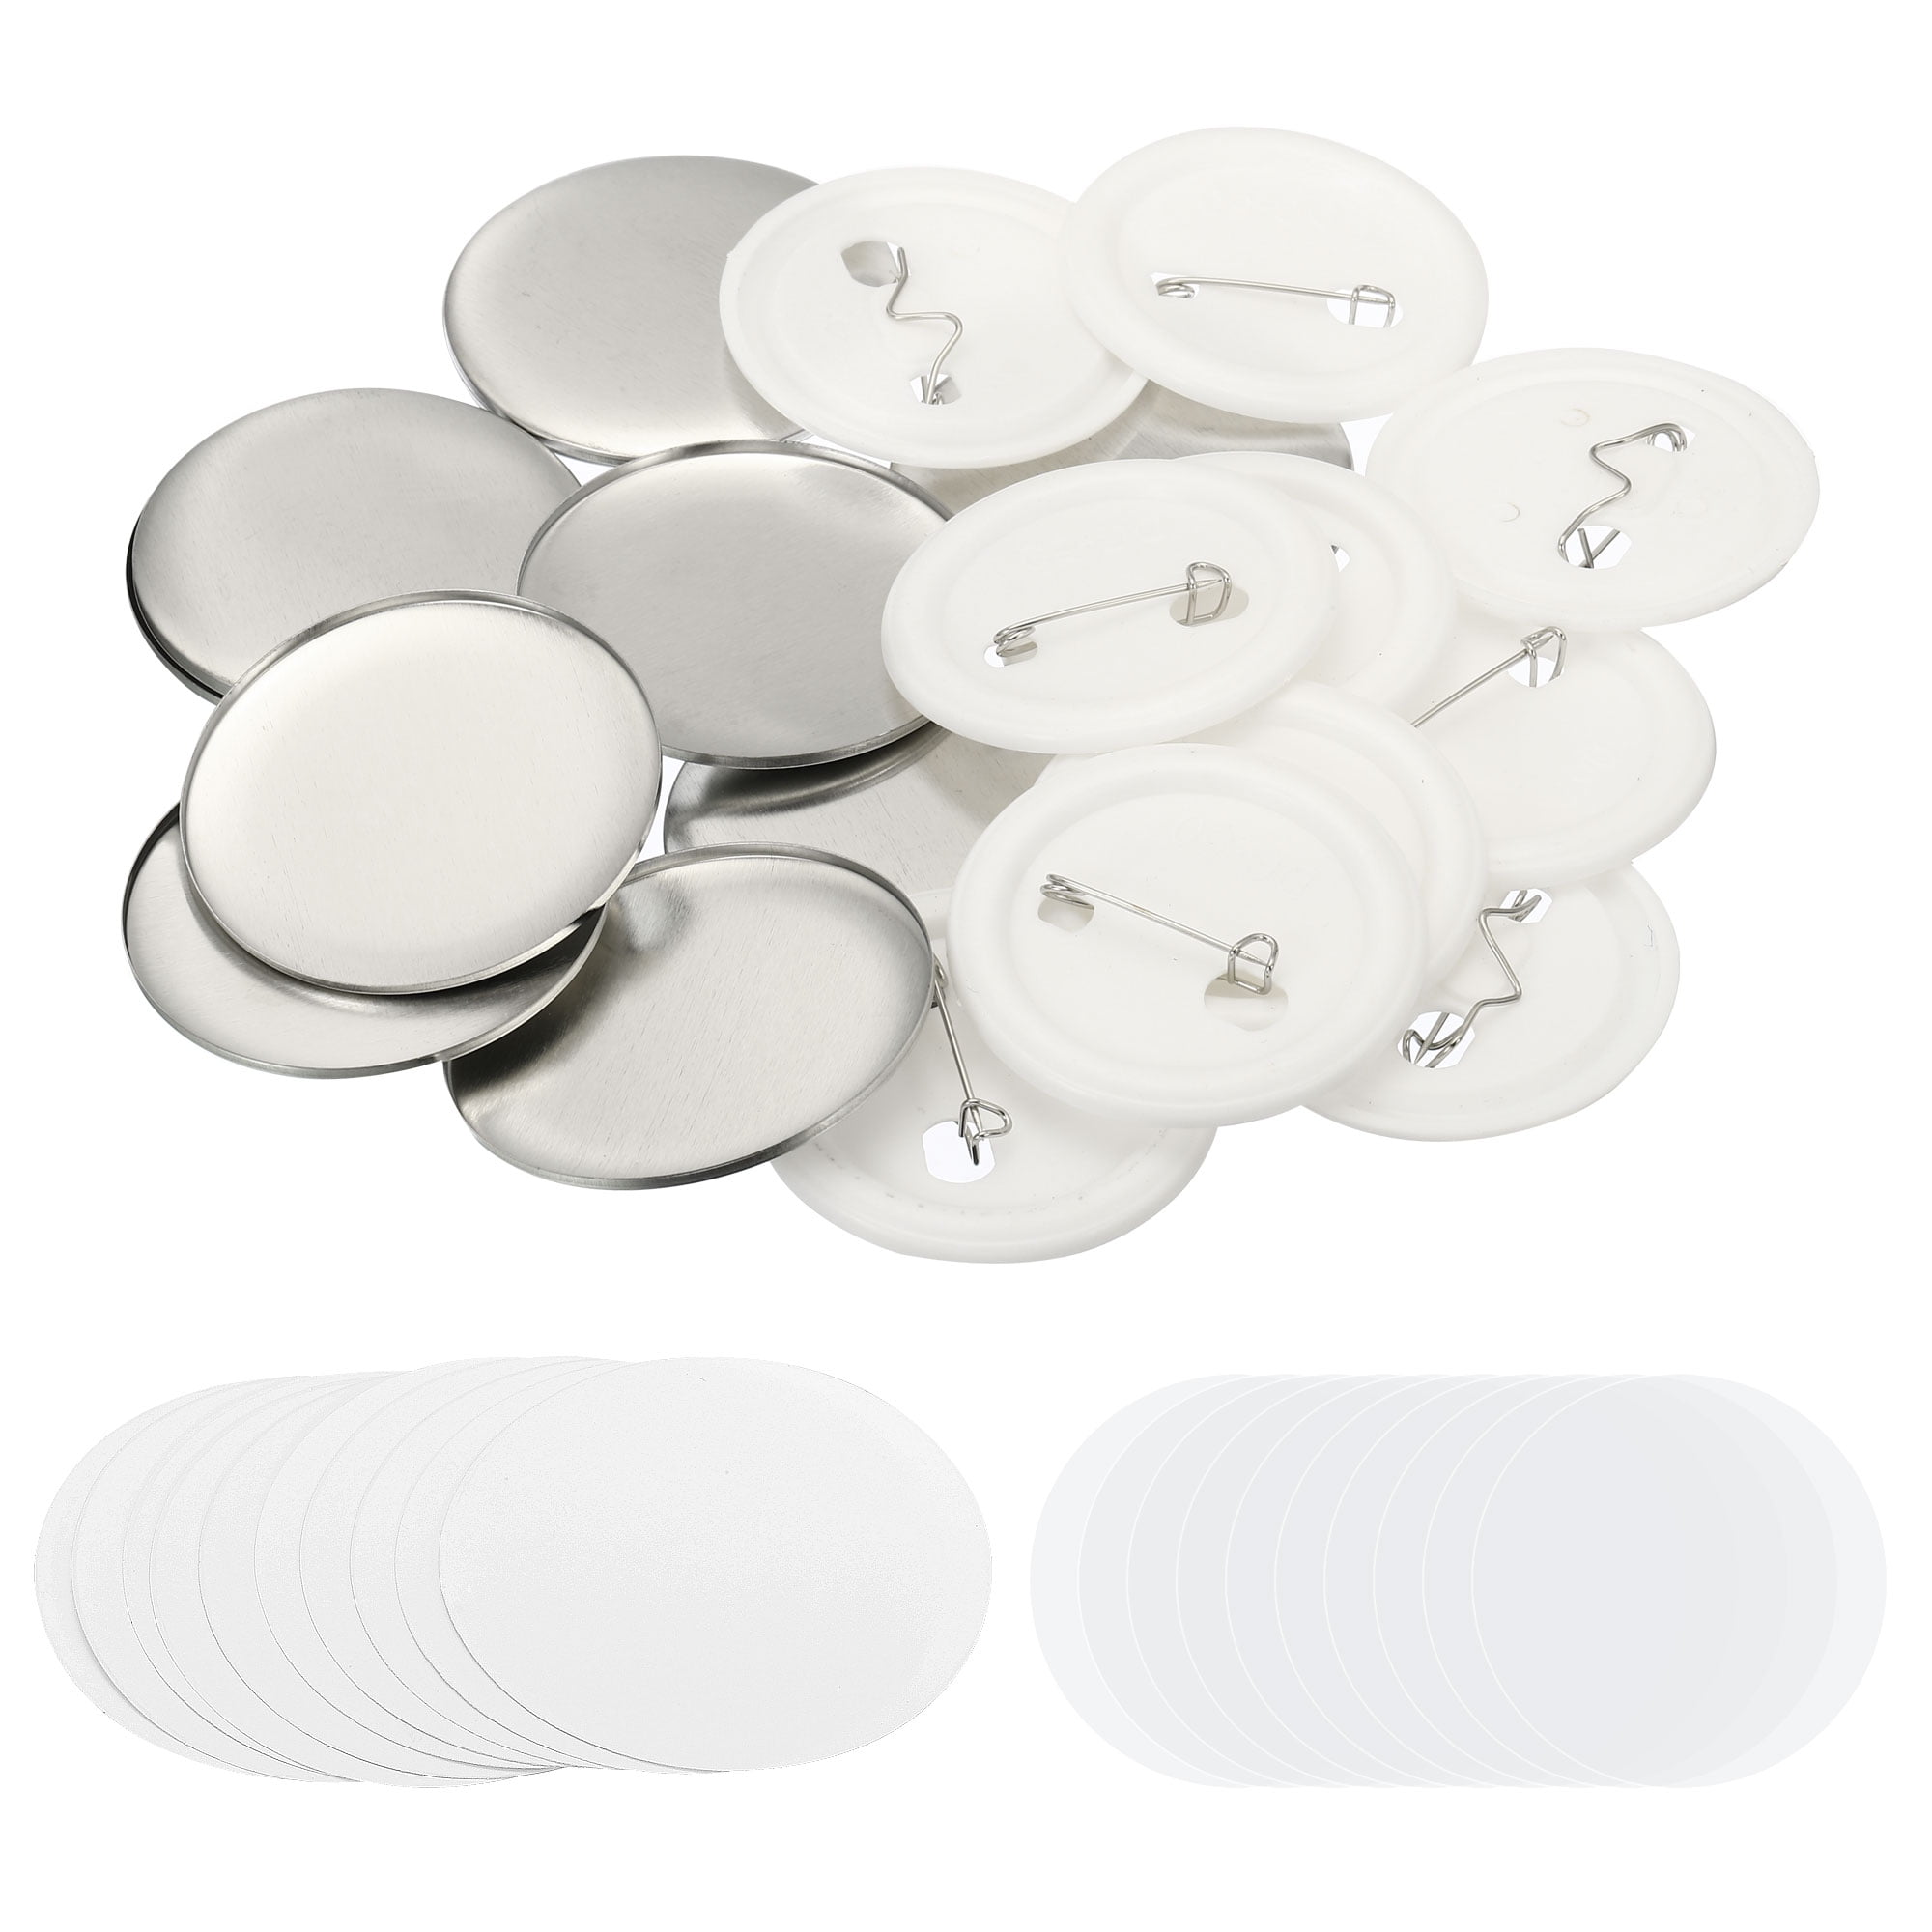 1.25inch Blank Button Making Supplies,25Pcs Badge Parts for Button